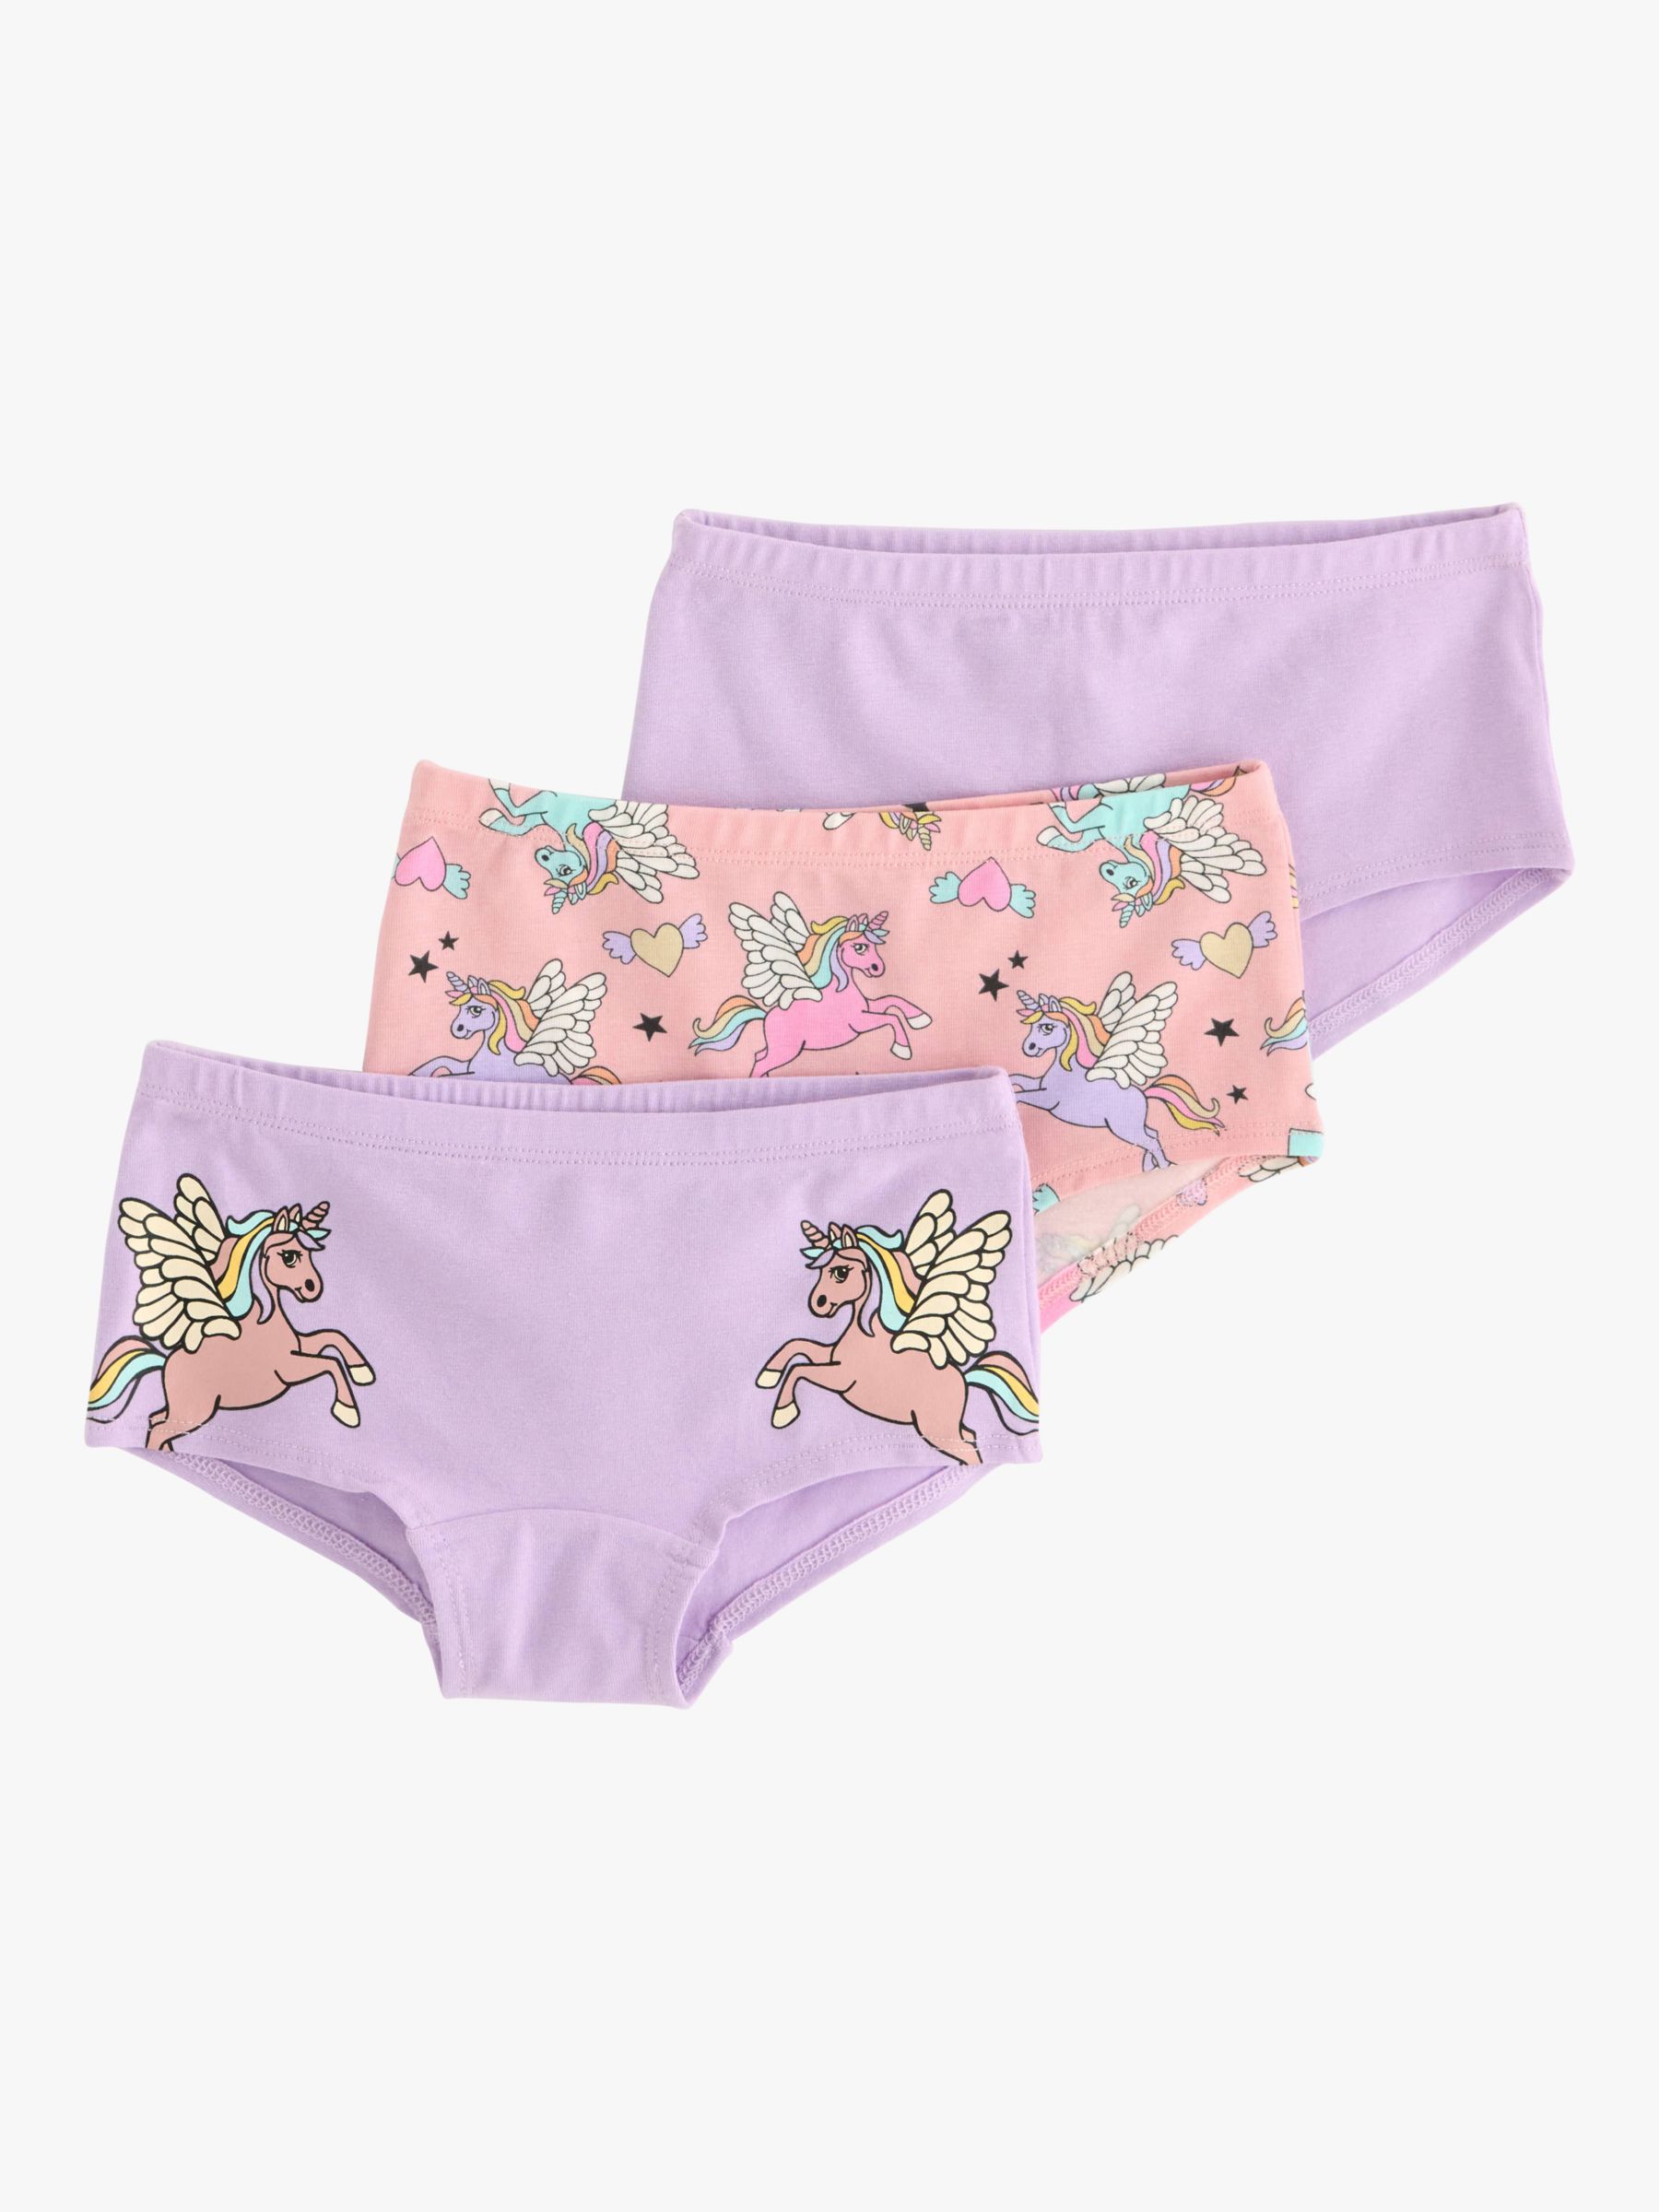 Lindex Kids' Unicorn Print Hipster Briefs, Pack Of 3, Light Lilac/Multi, 4-6 years